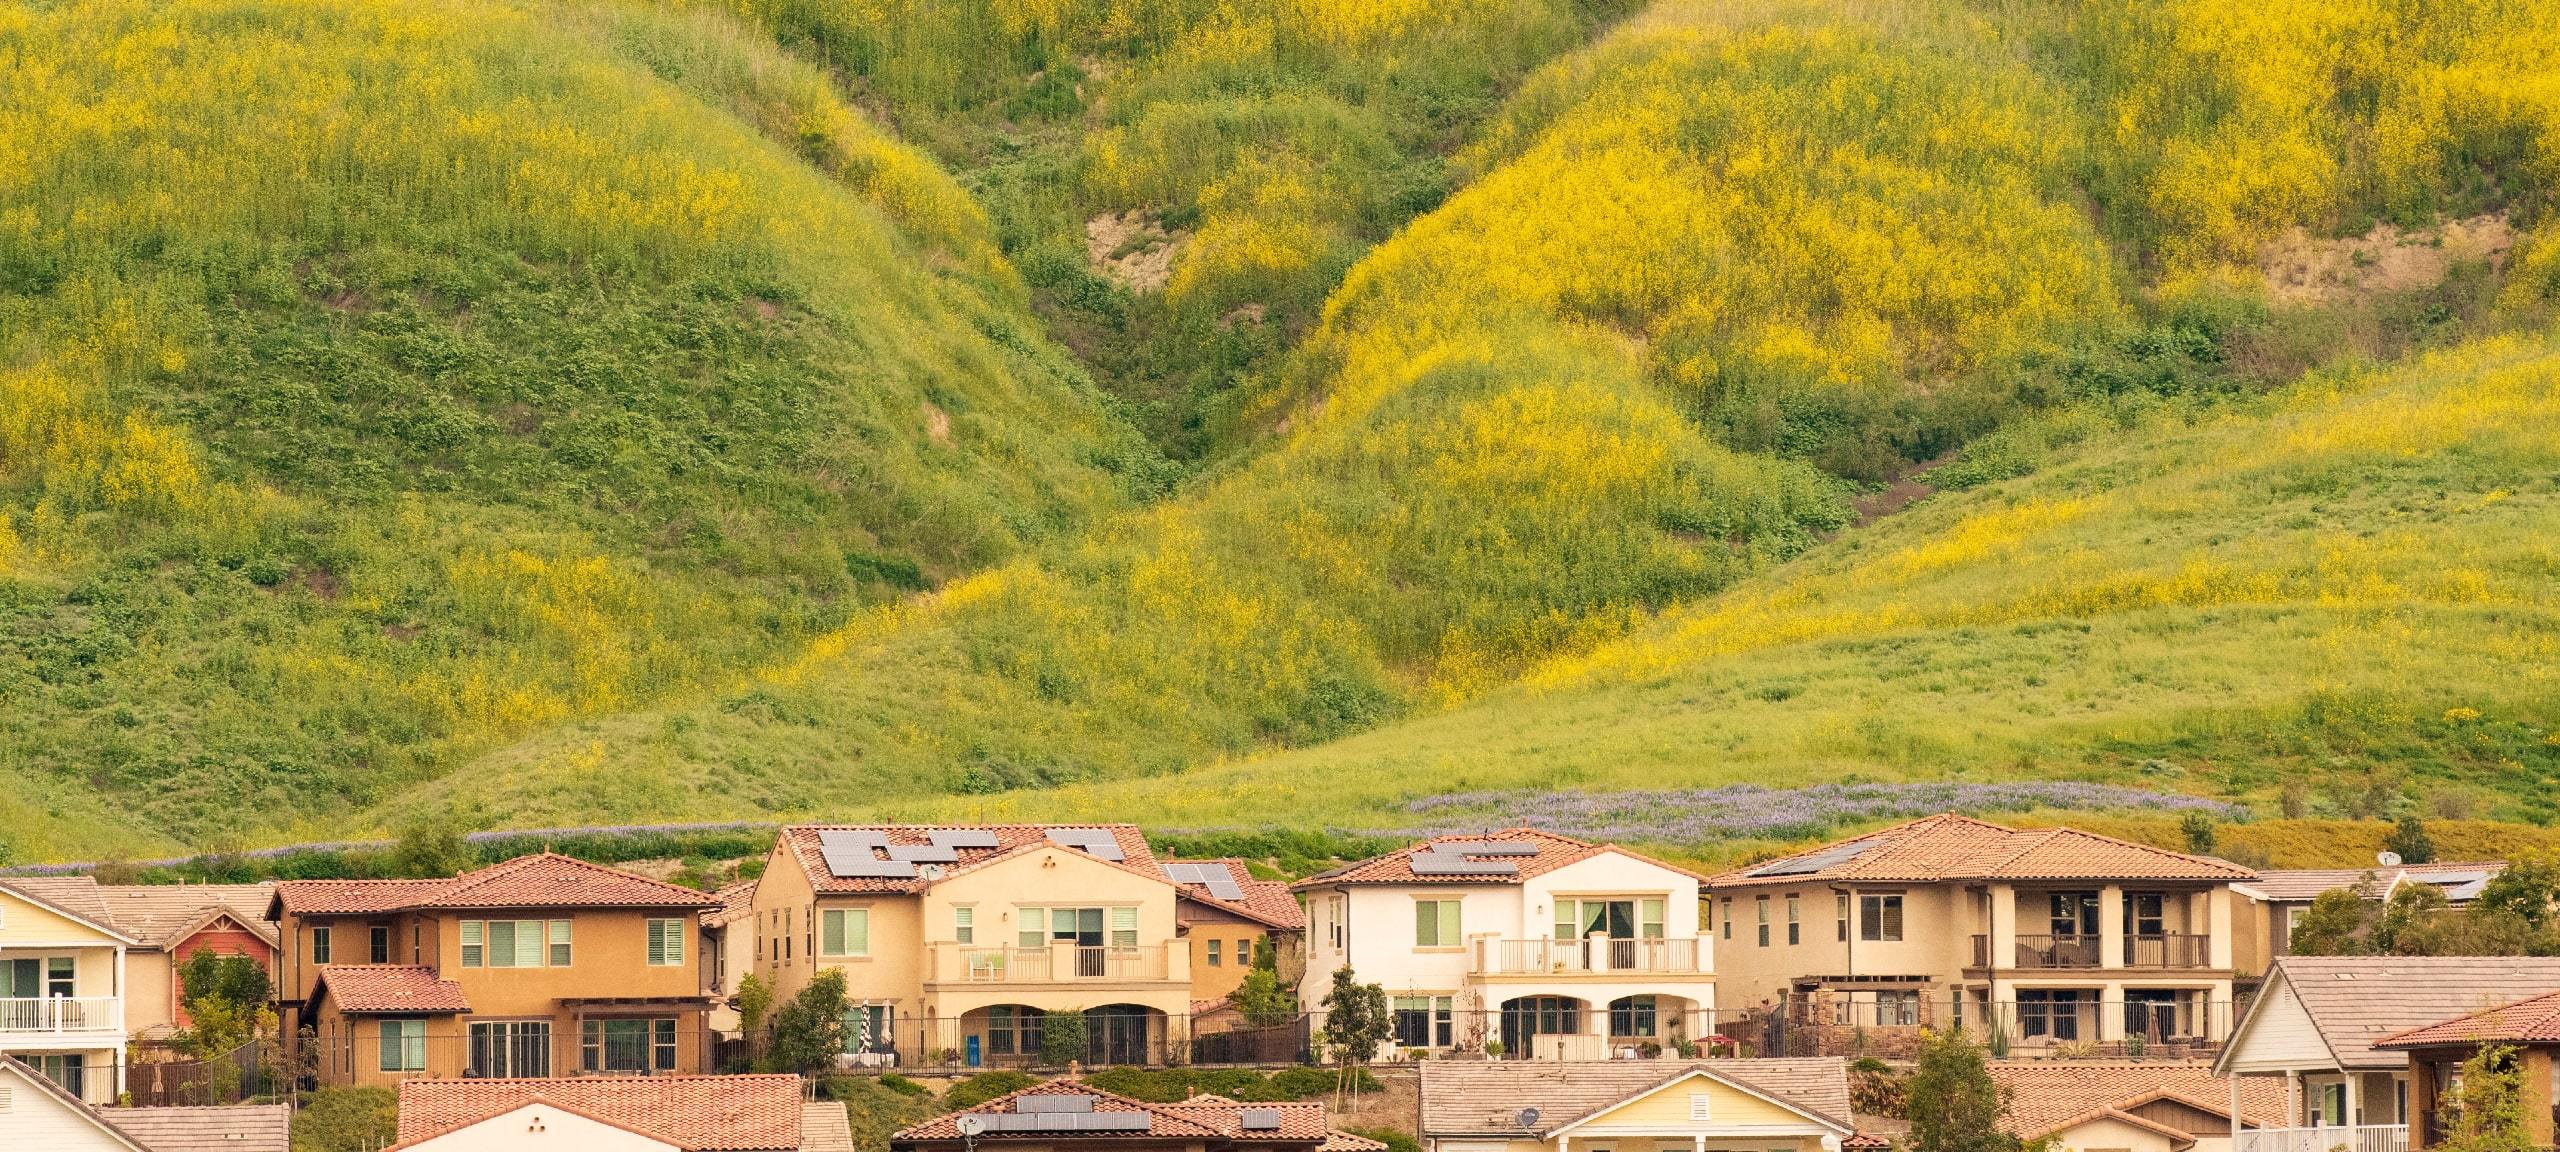 Green and yellow hillside with homes in Rancho Mission Viejo, CA